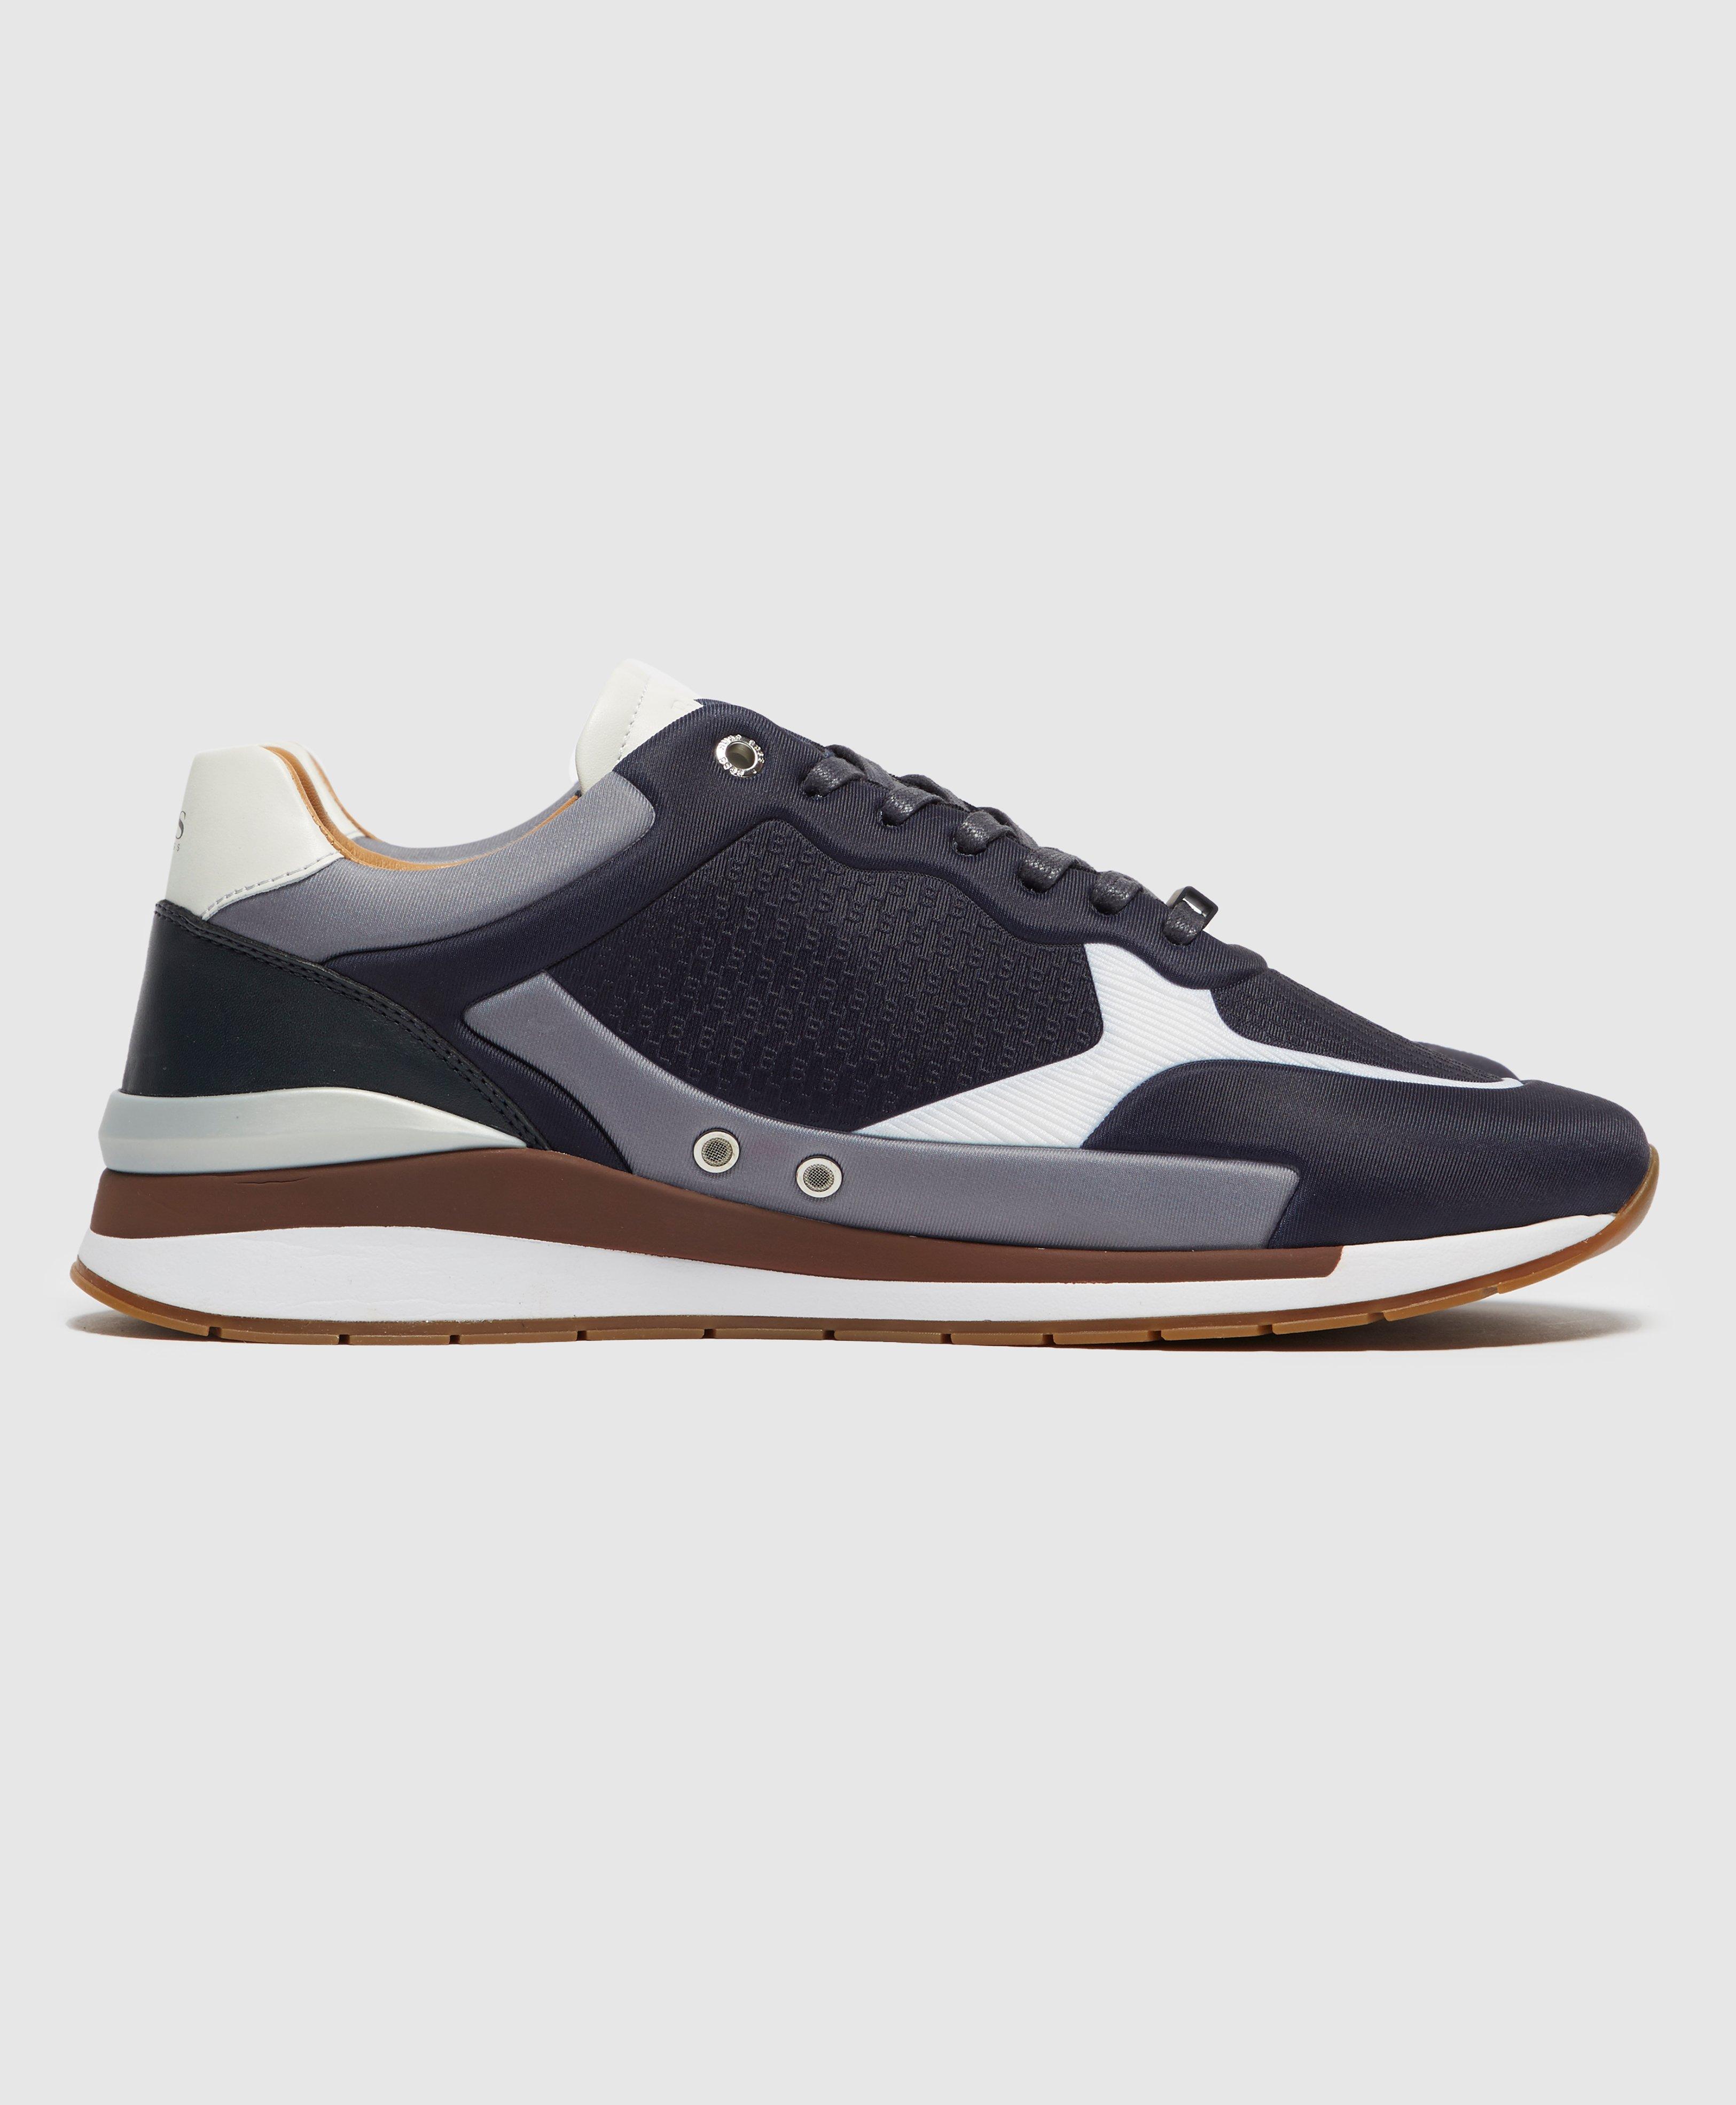 BOSS by HUGO BOSS Leather Element Run Trainers in Blue for Men - Lyst